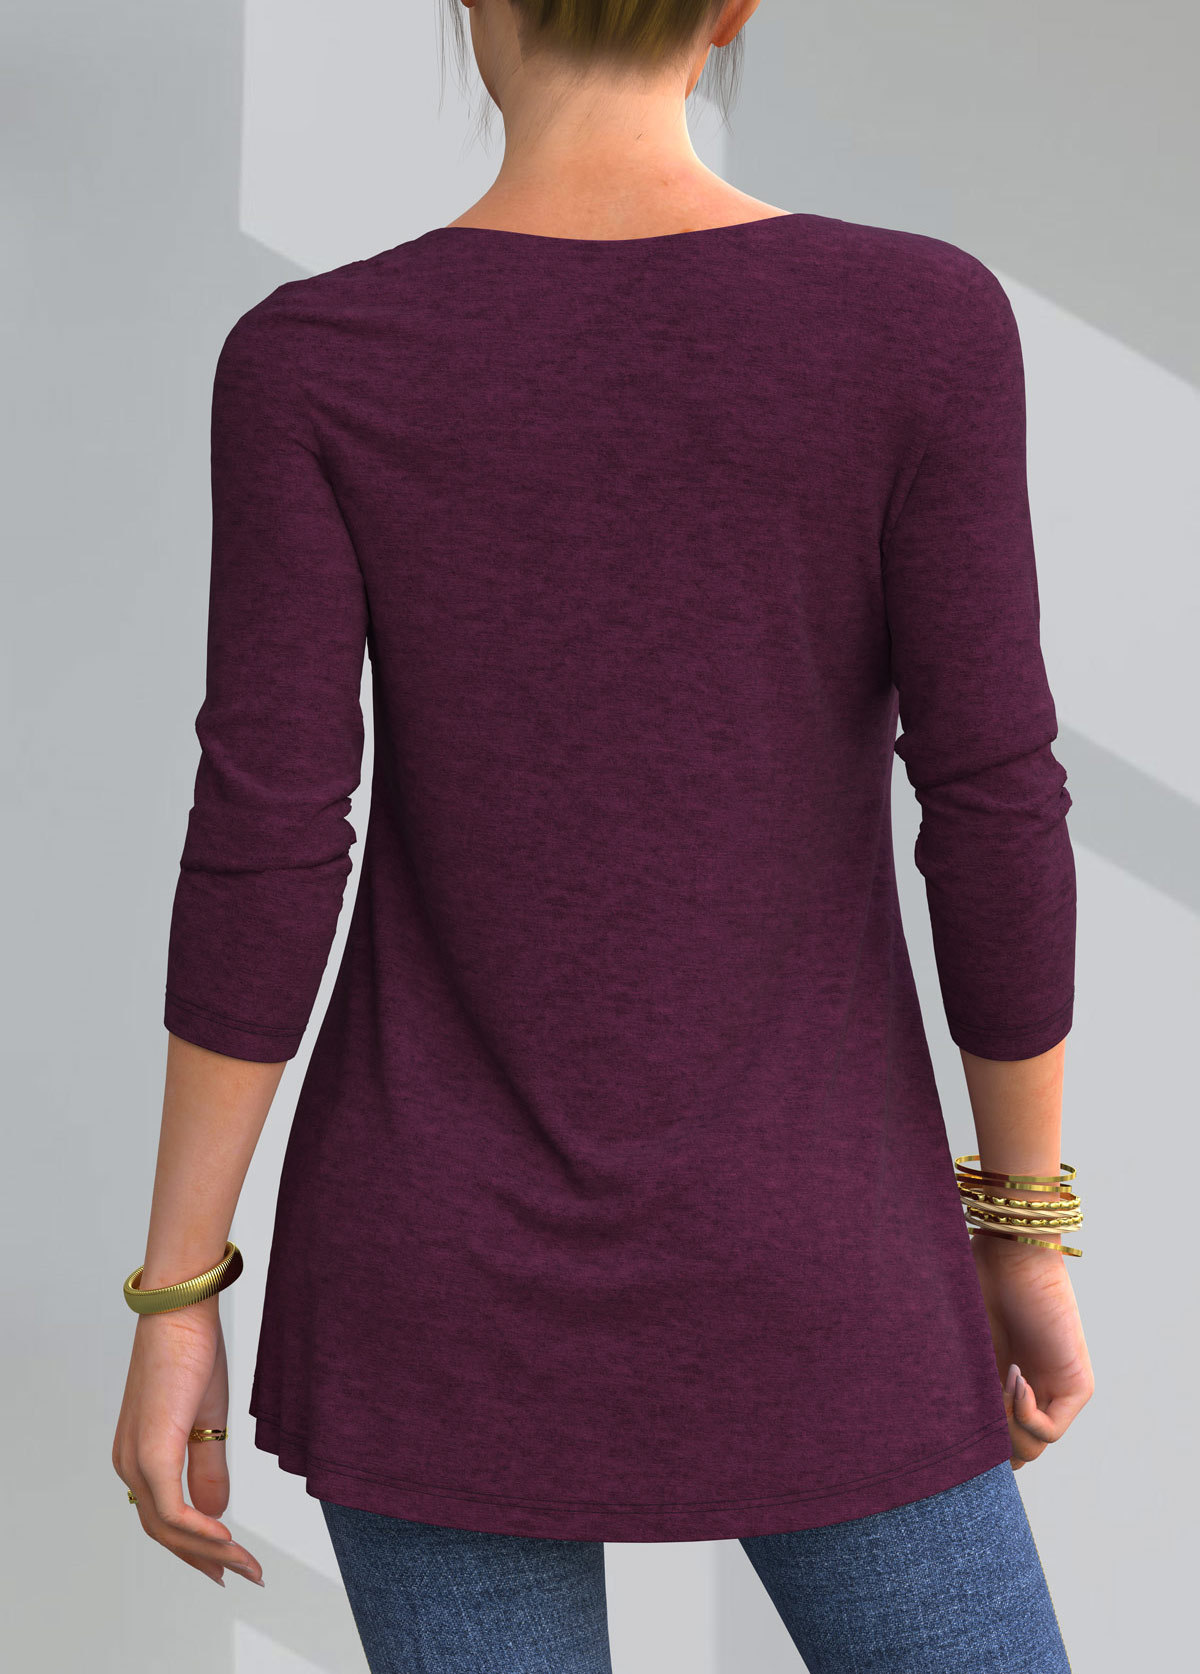 Lace Patchwork Round Neck Solid T Shirt